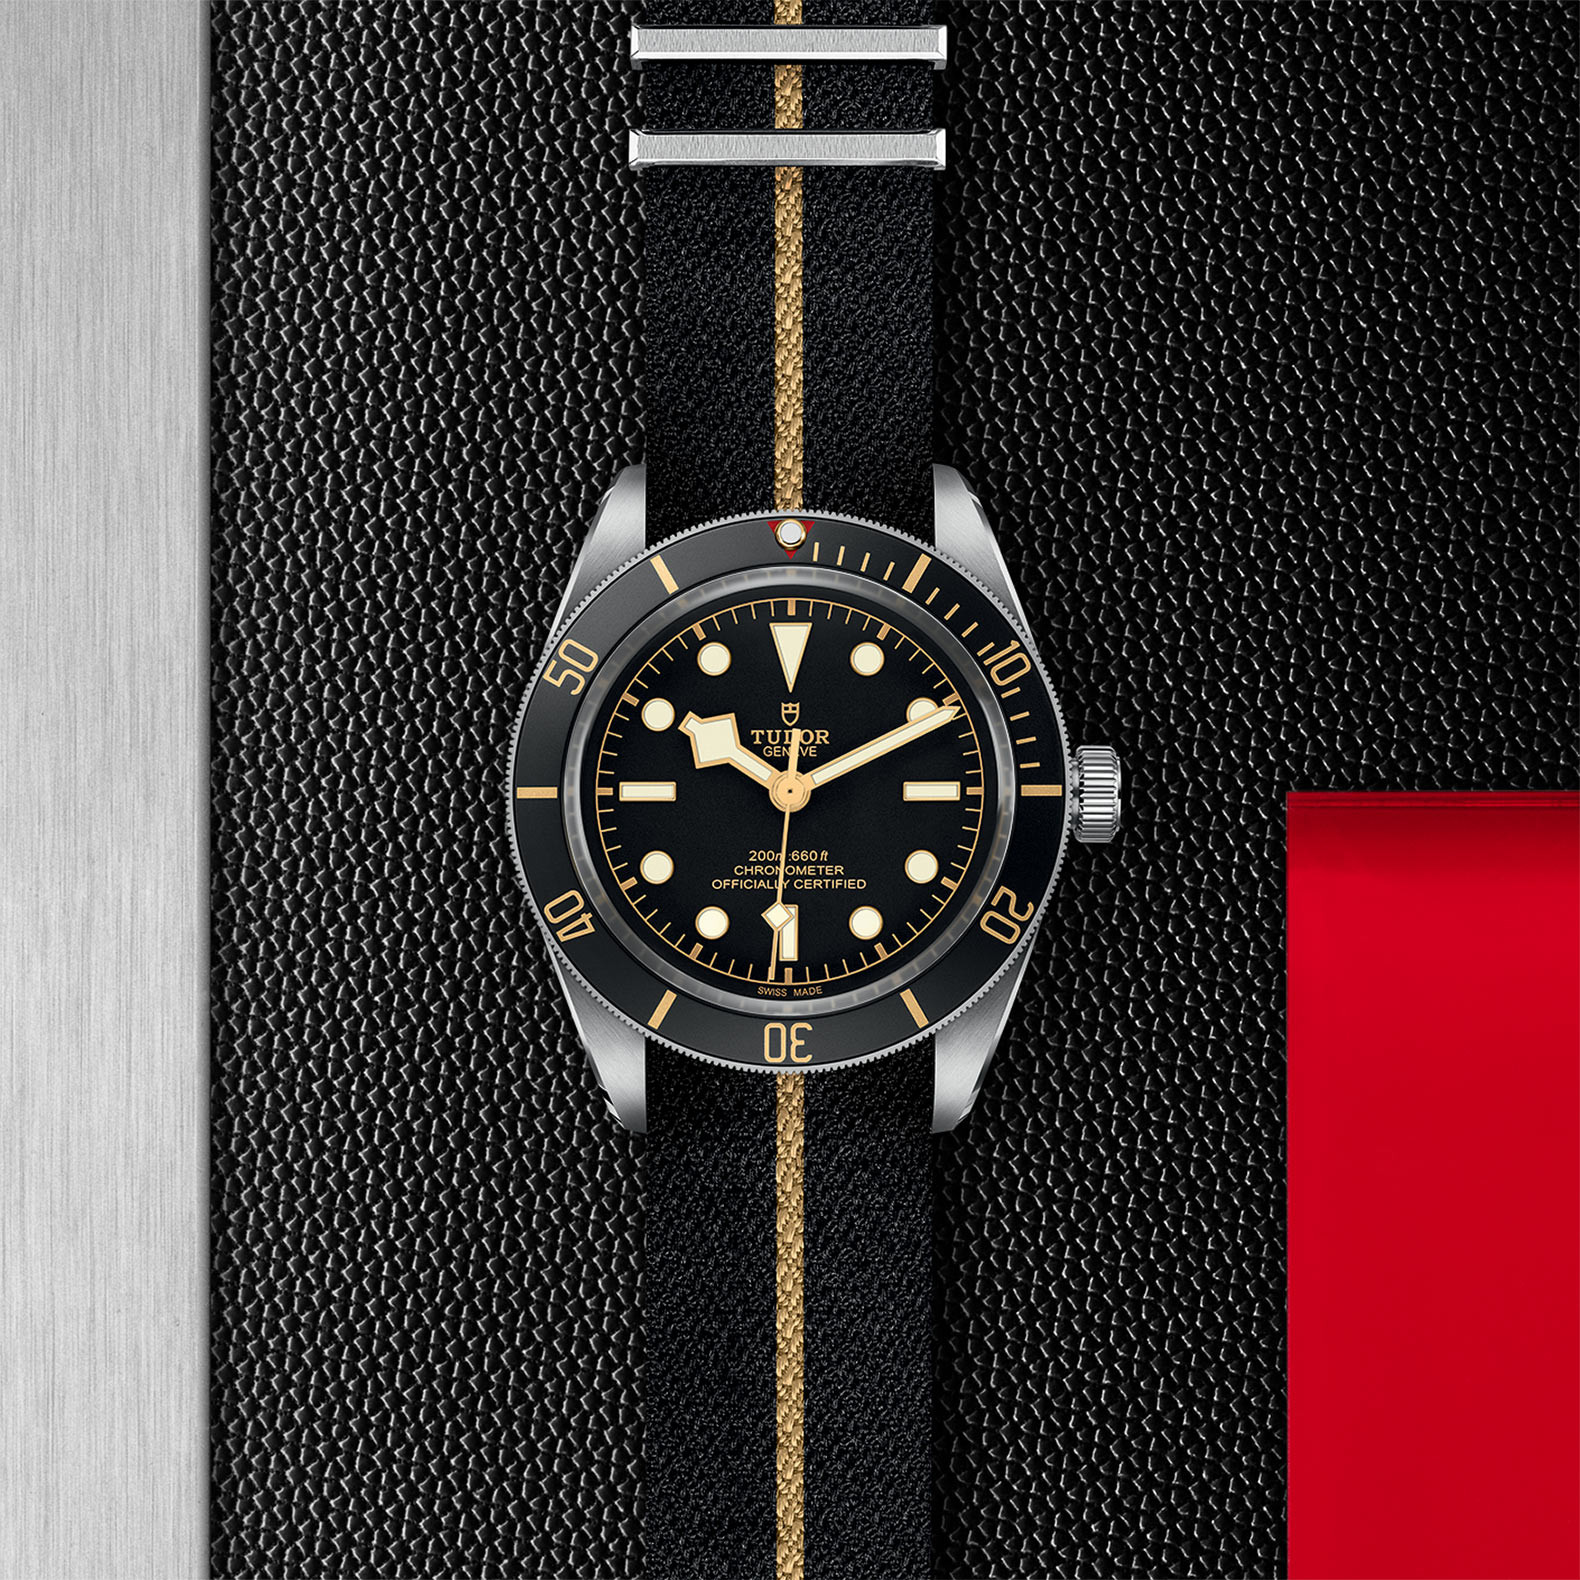 TUDOR Black Bay Fifty-Eight Watch in Store Flat Lay